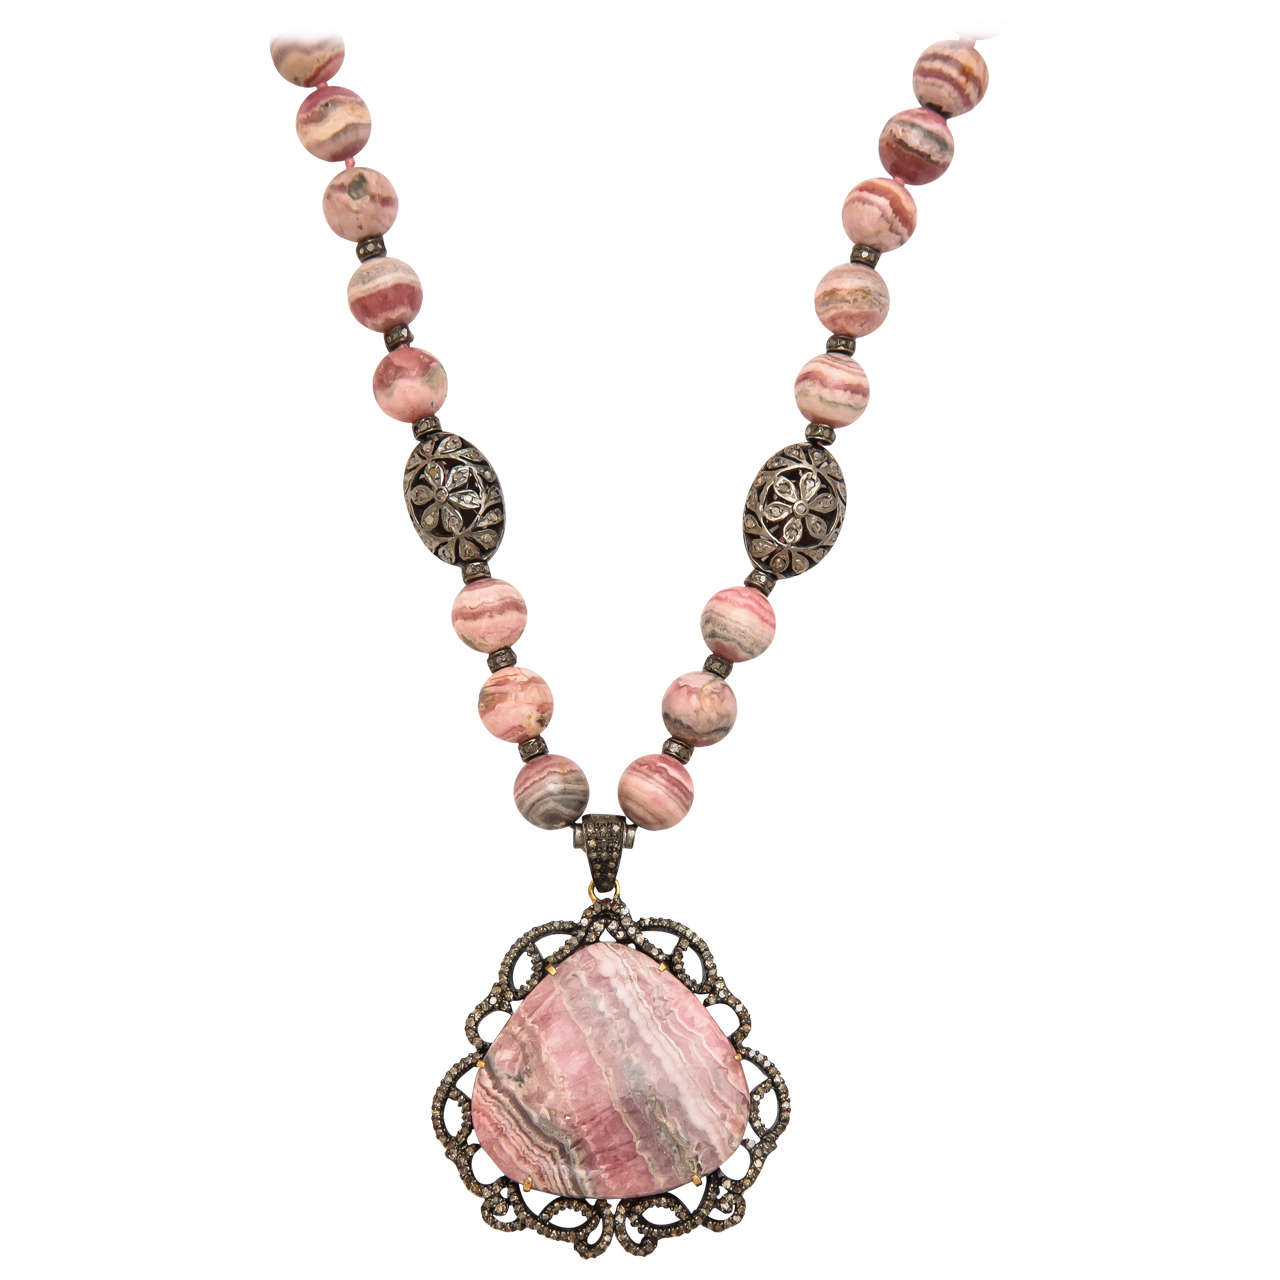 Stunning Long Rhodochrosite Bead Pendant Necklace For Sale